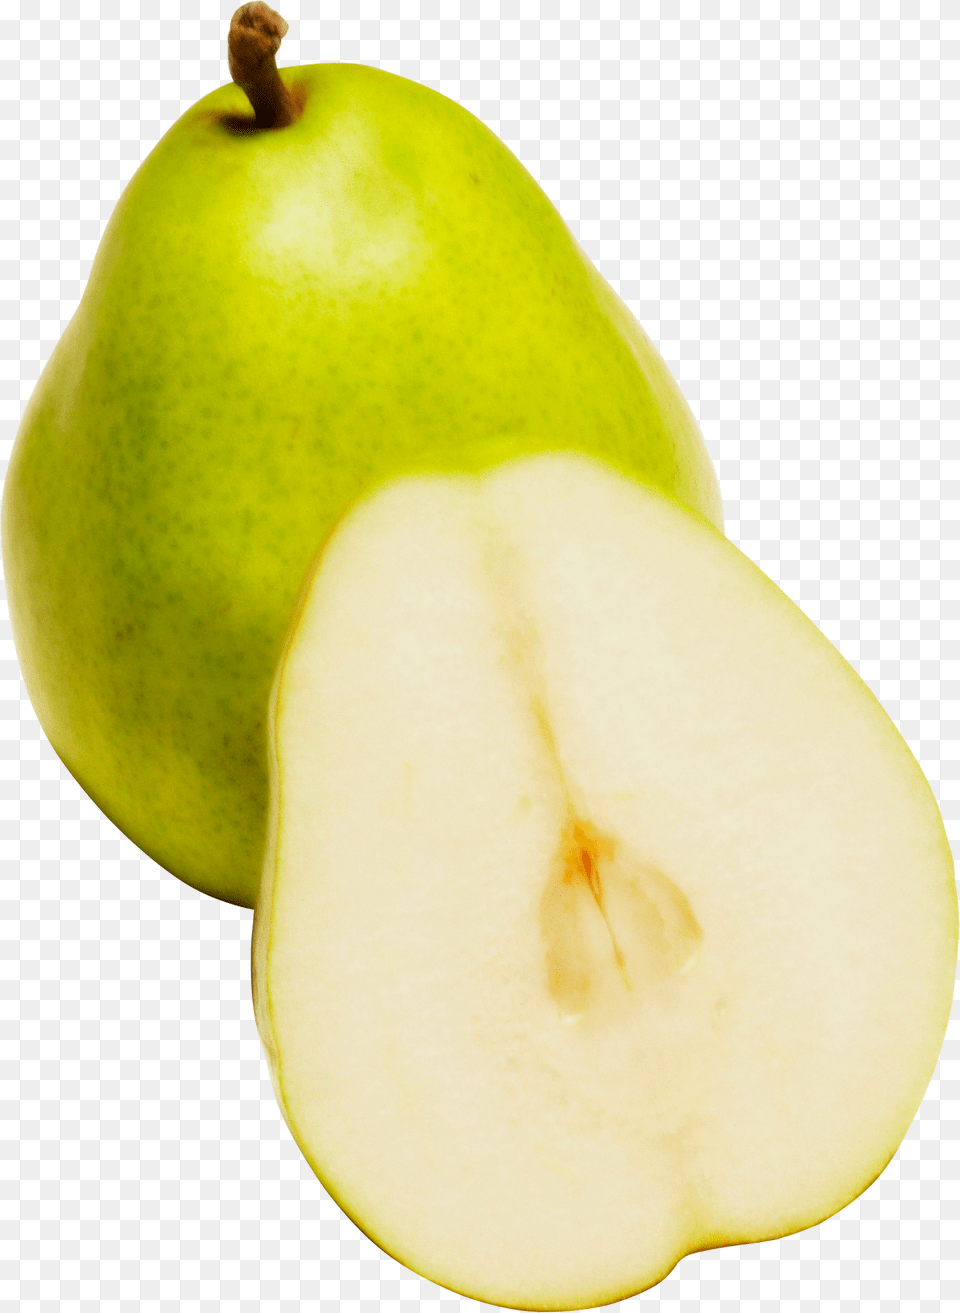 Pear Image Pear, Food, Fruit, Plant, Produce Free Png Download